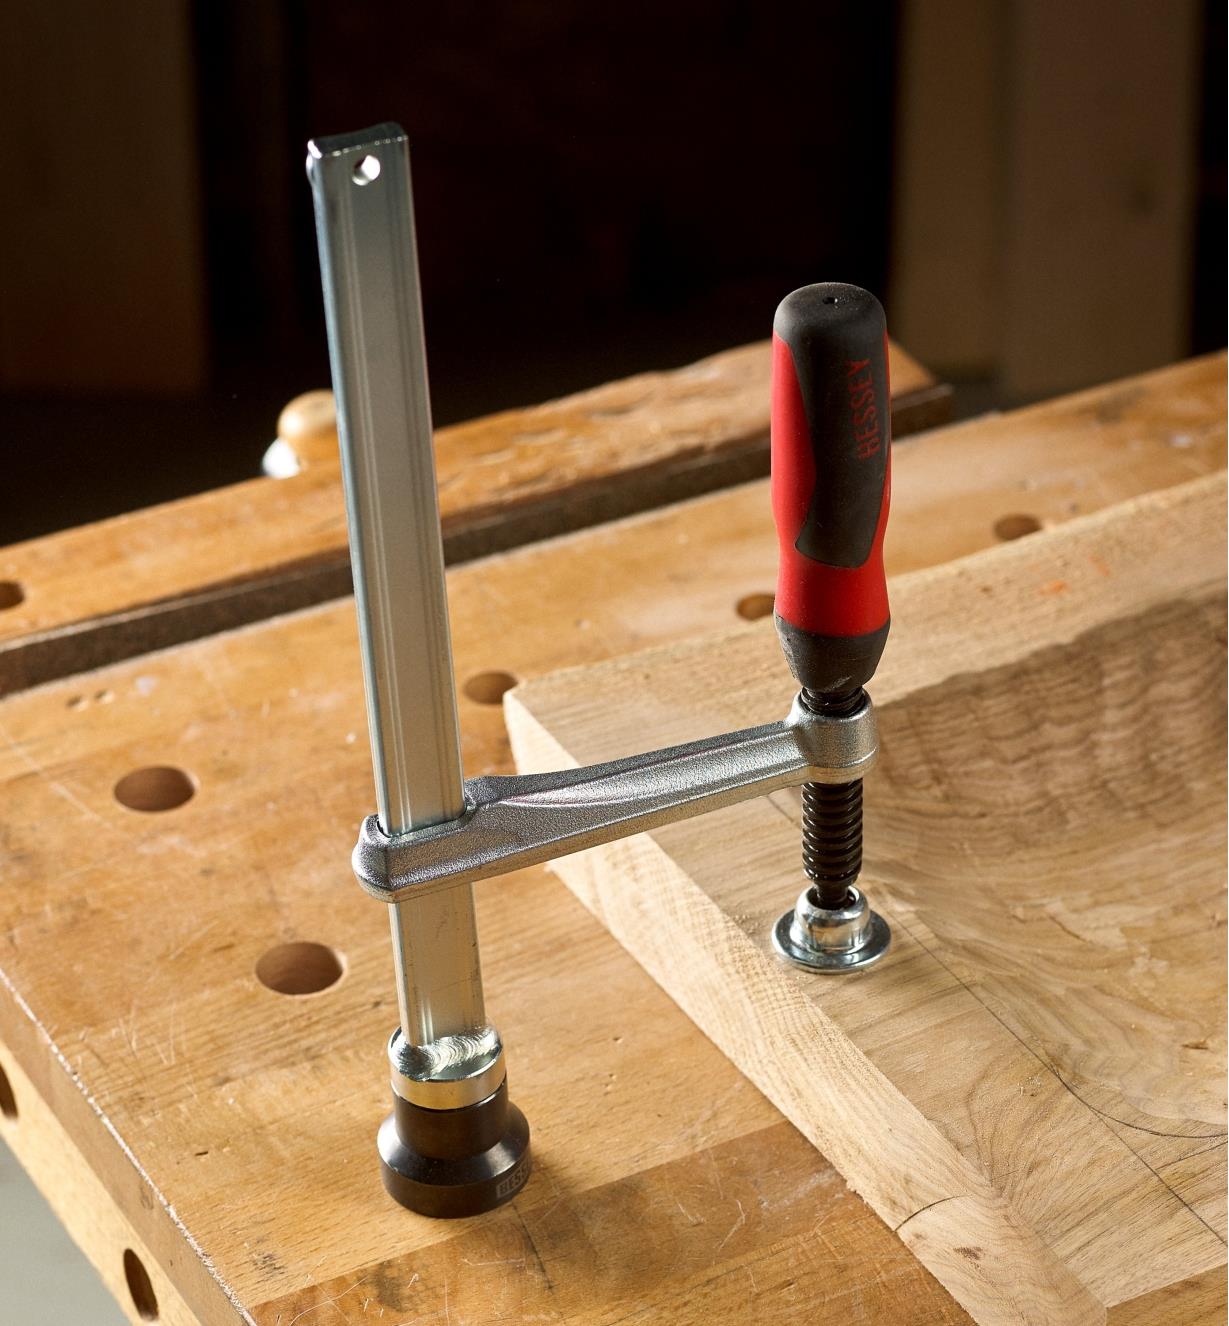 Bessey hold-down clamp clamping a wooden tray to a workbench